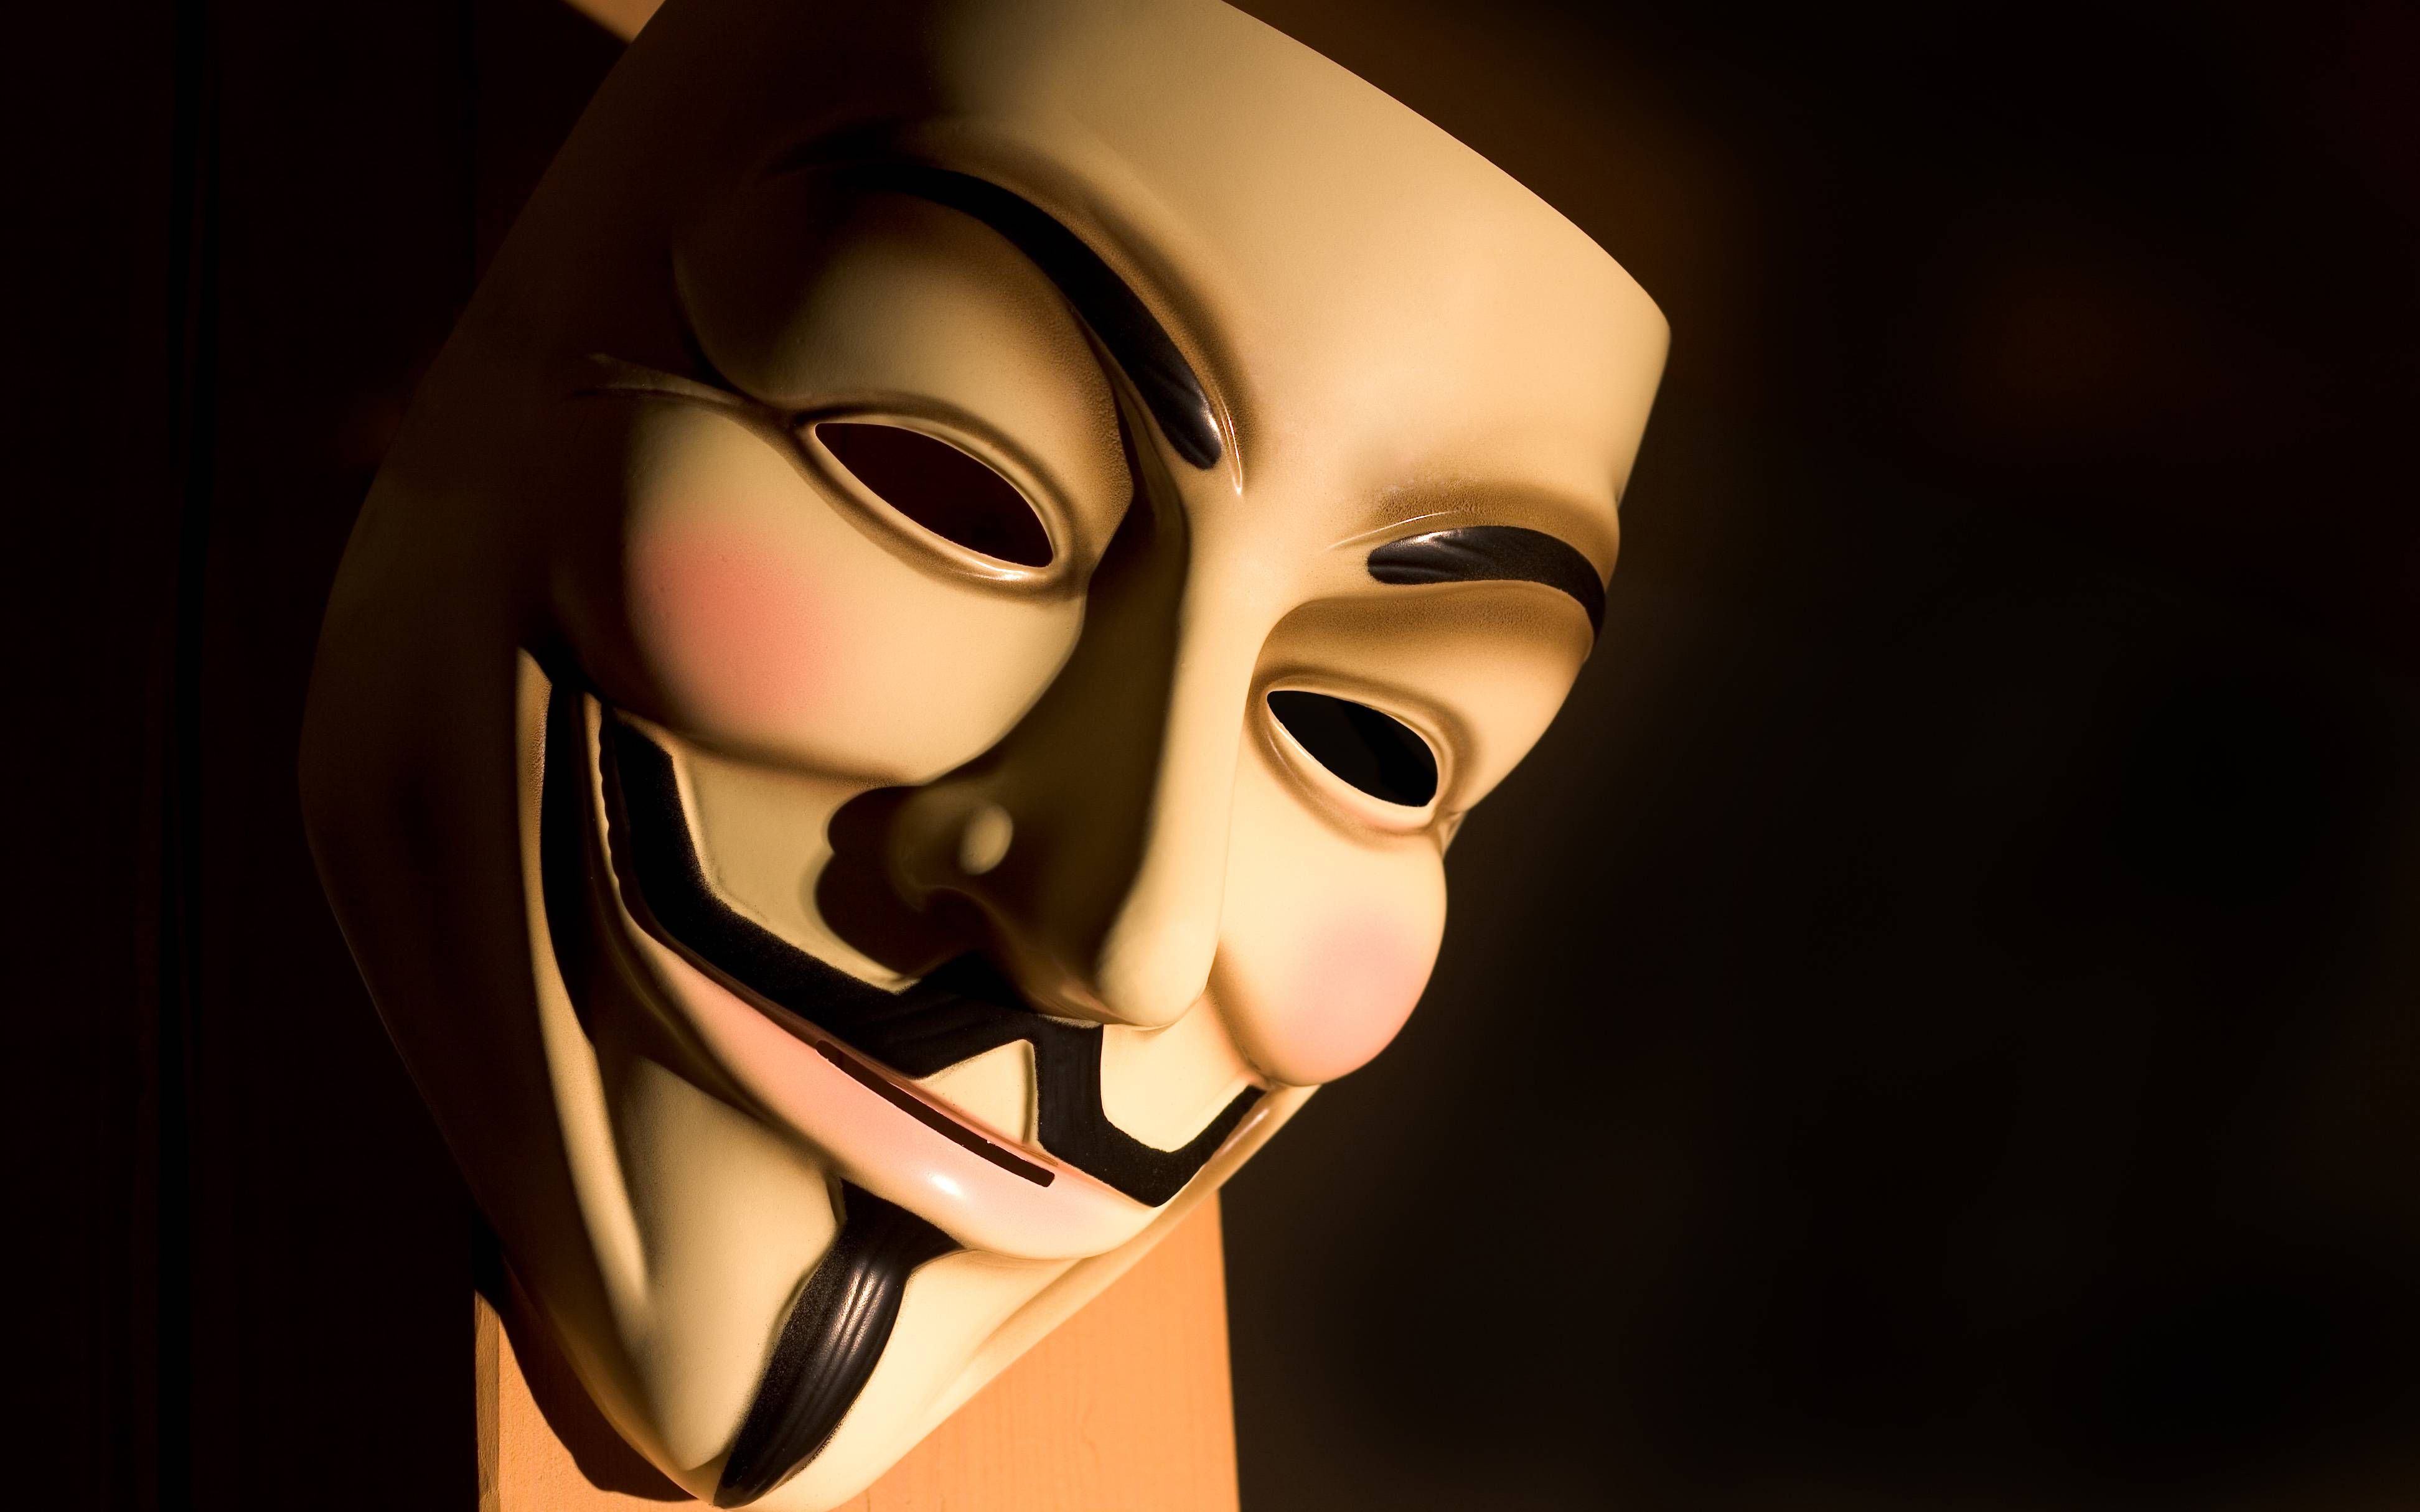 Anonymous v for vendetta wallpaper - - High Quality and other